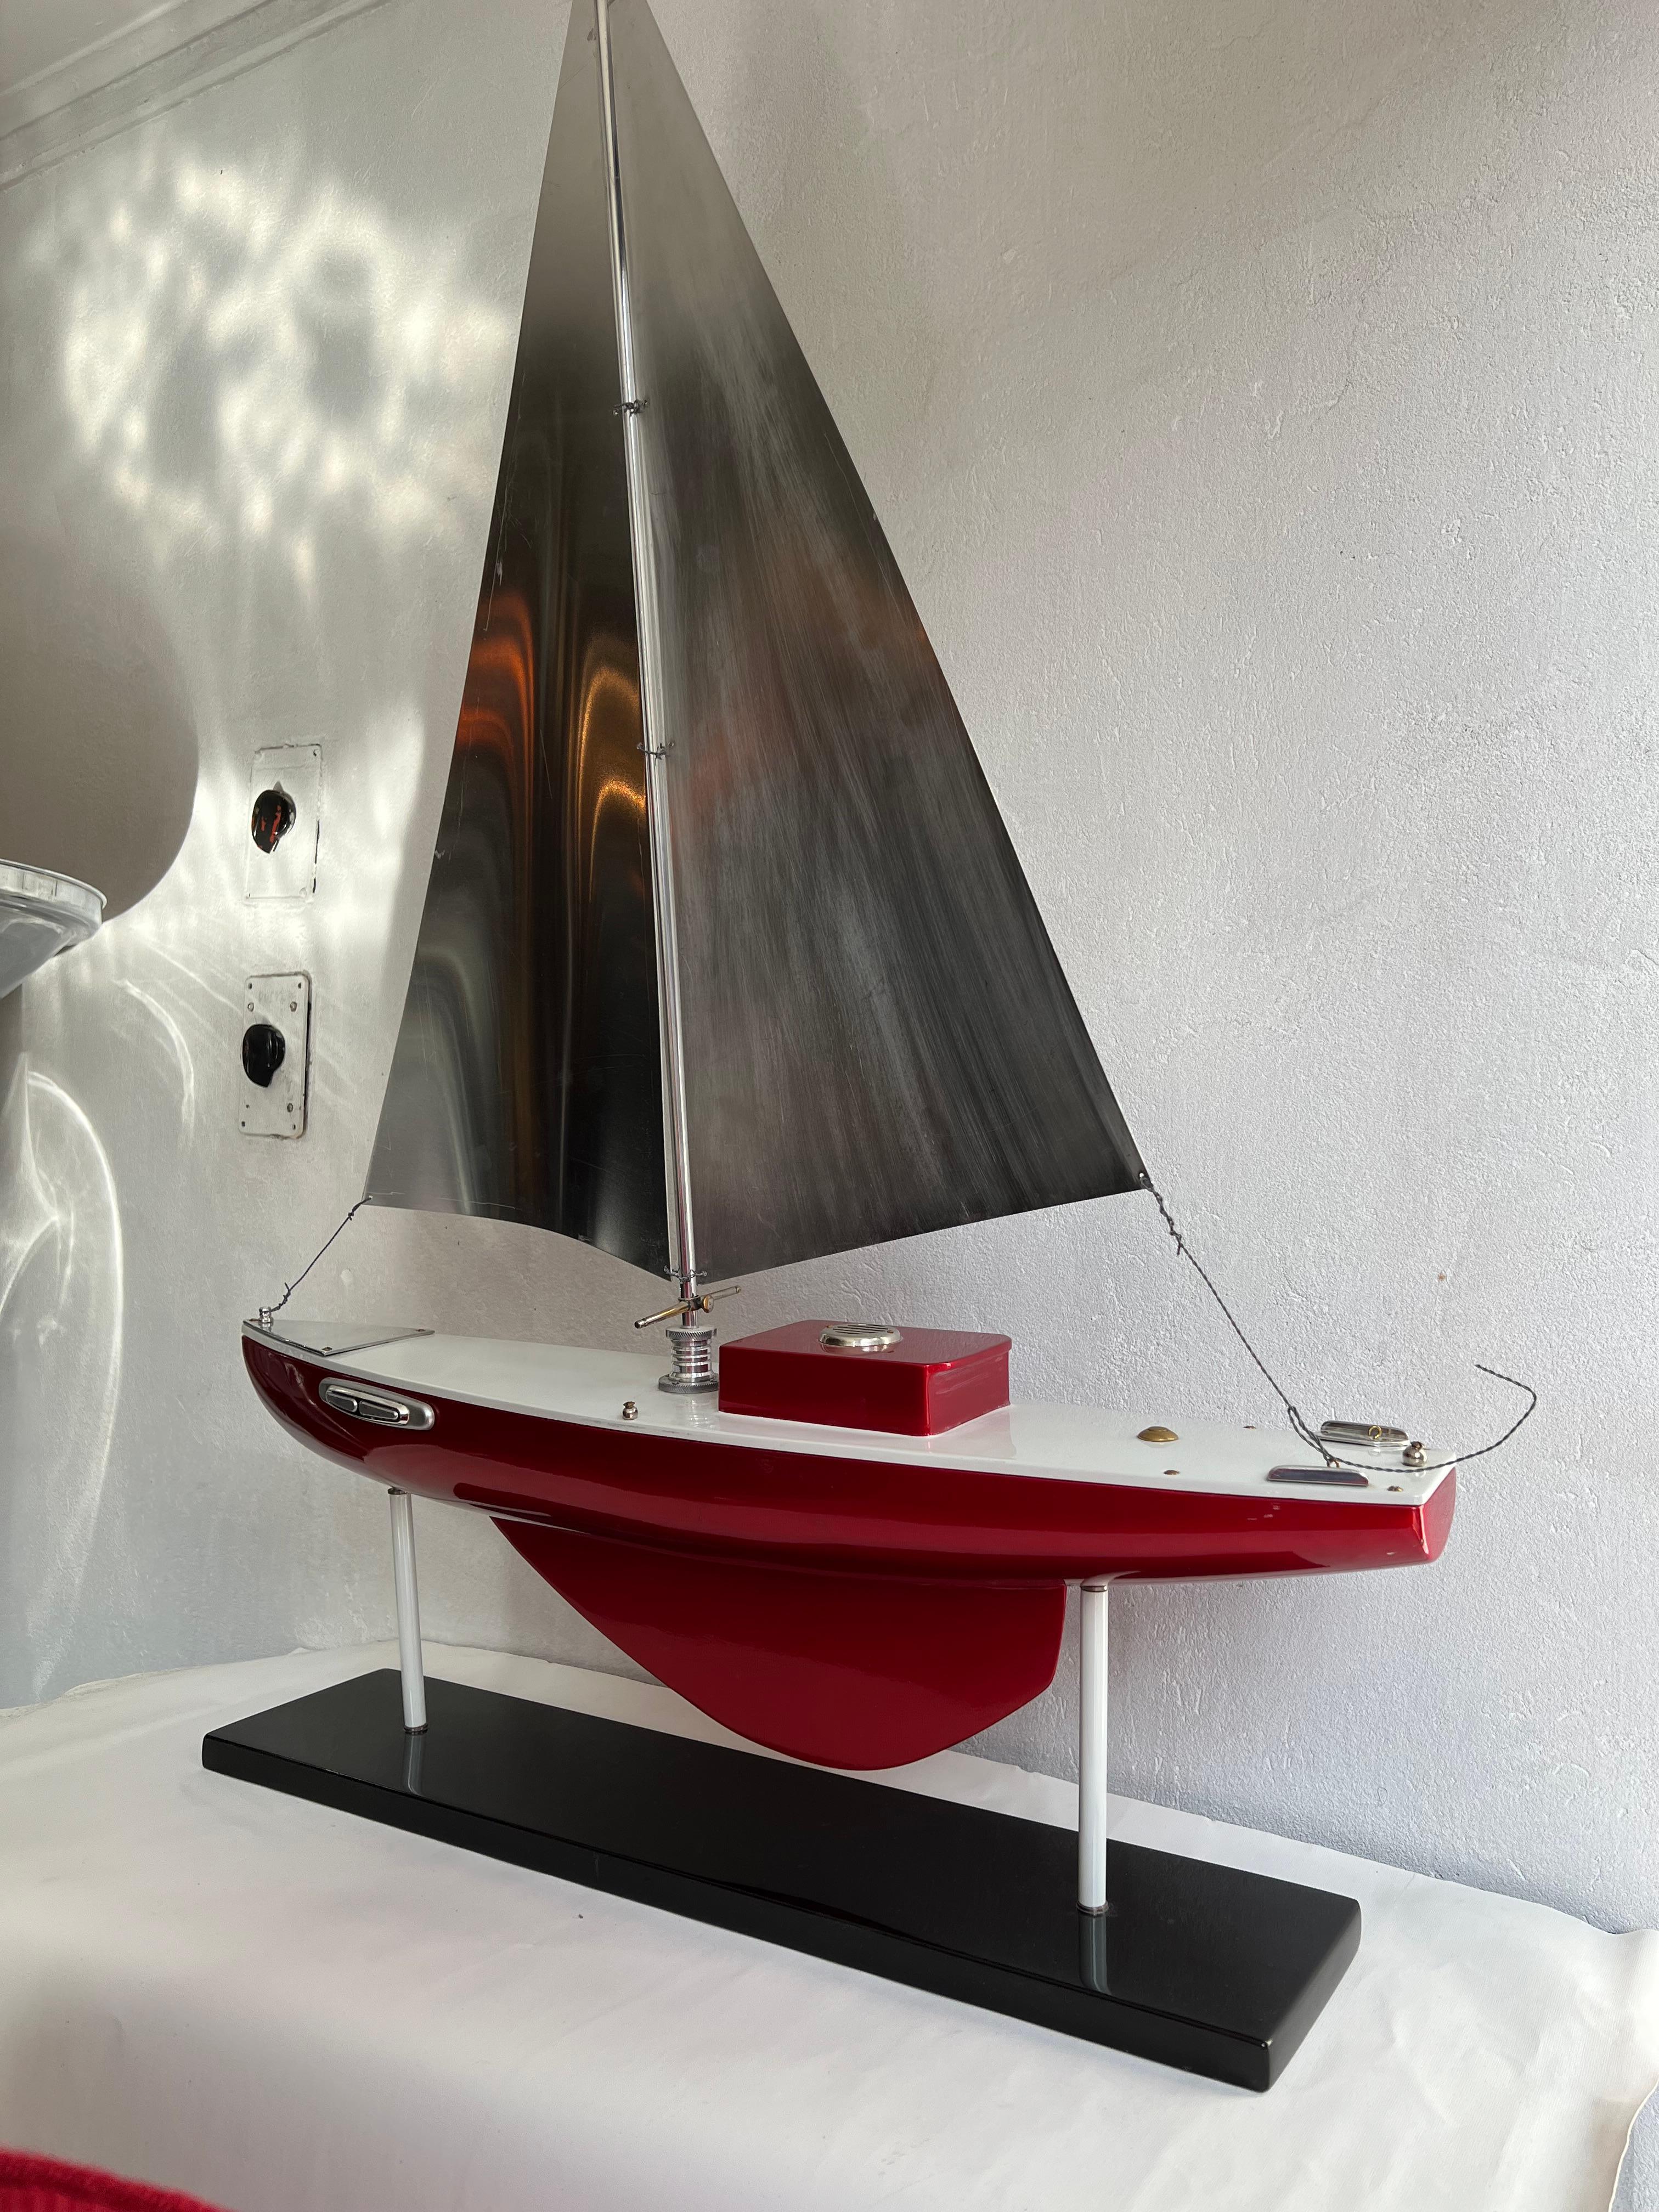 Contemporary Art Deco Inspired Boat in Wood and steel  Designer: Marcelo Peña, 2014 For Sale